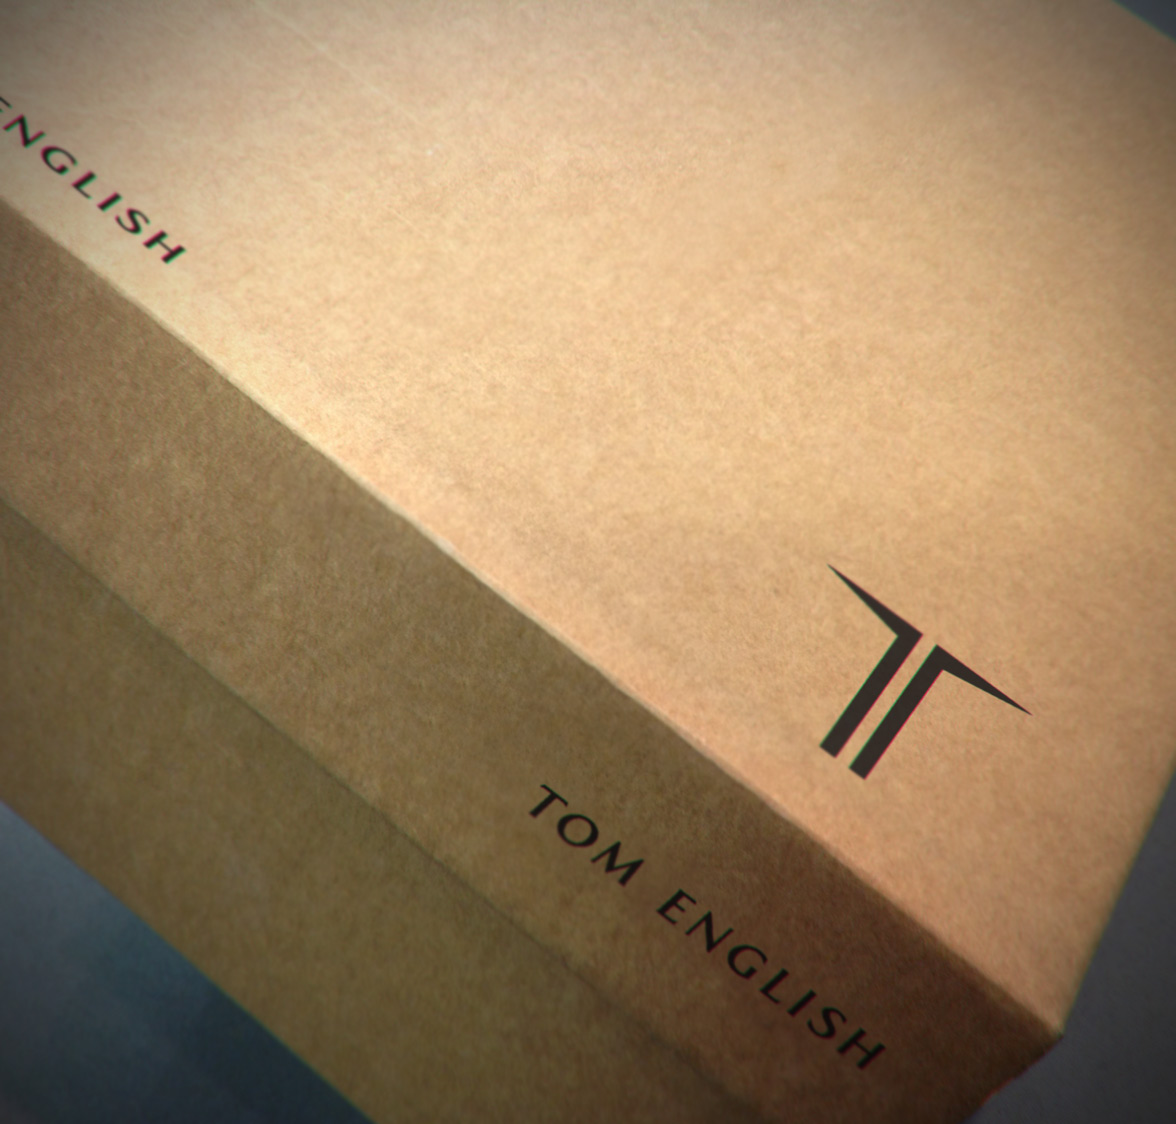 Shoe box showing brand identity elements to top and side